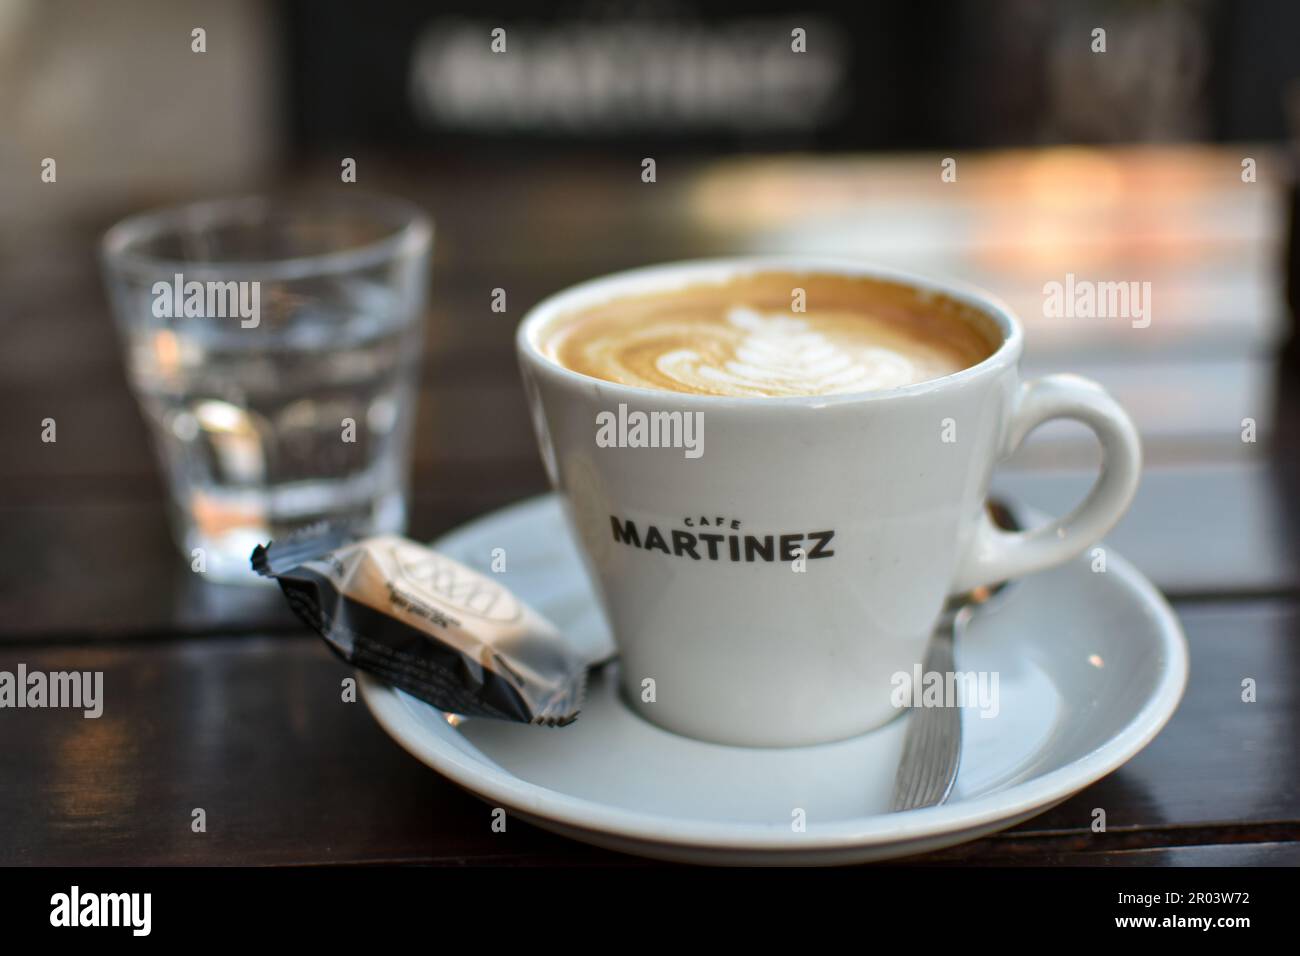 cup of cappuccino (called cafe con leche in Argentina) at Cafe Martinez, Argentina Stock Photo